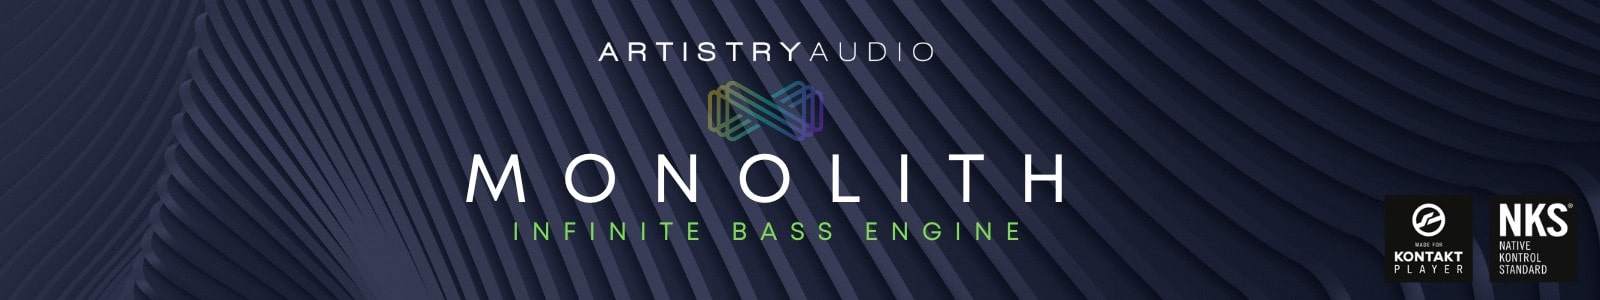 MONOLITH by Artistry Audio